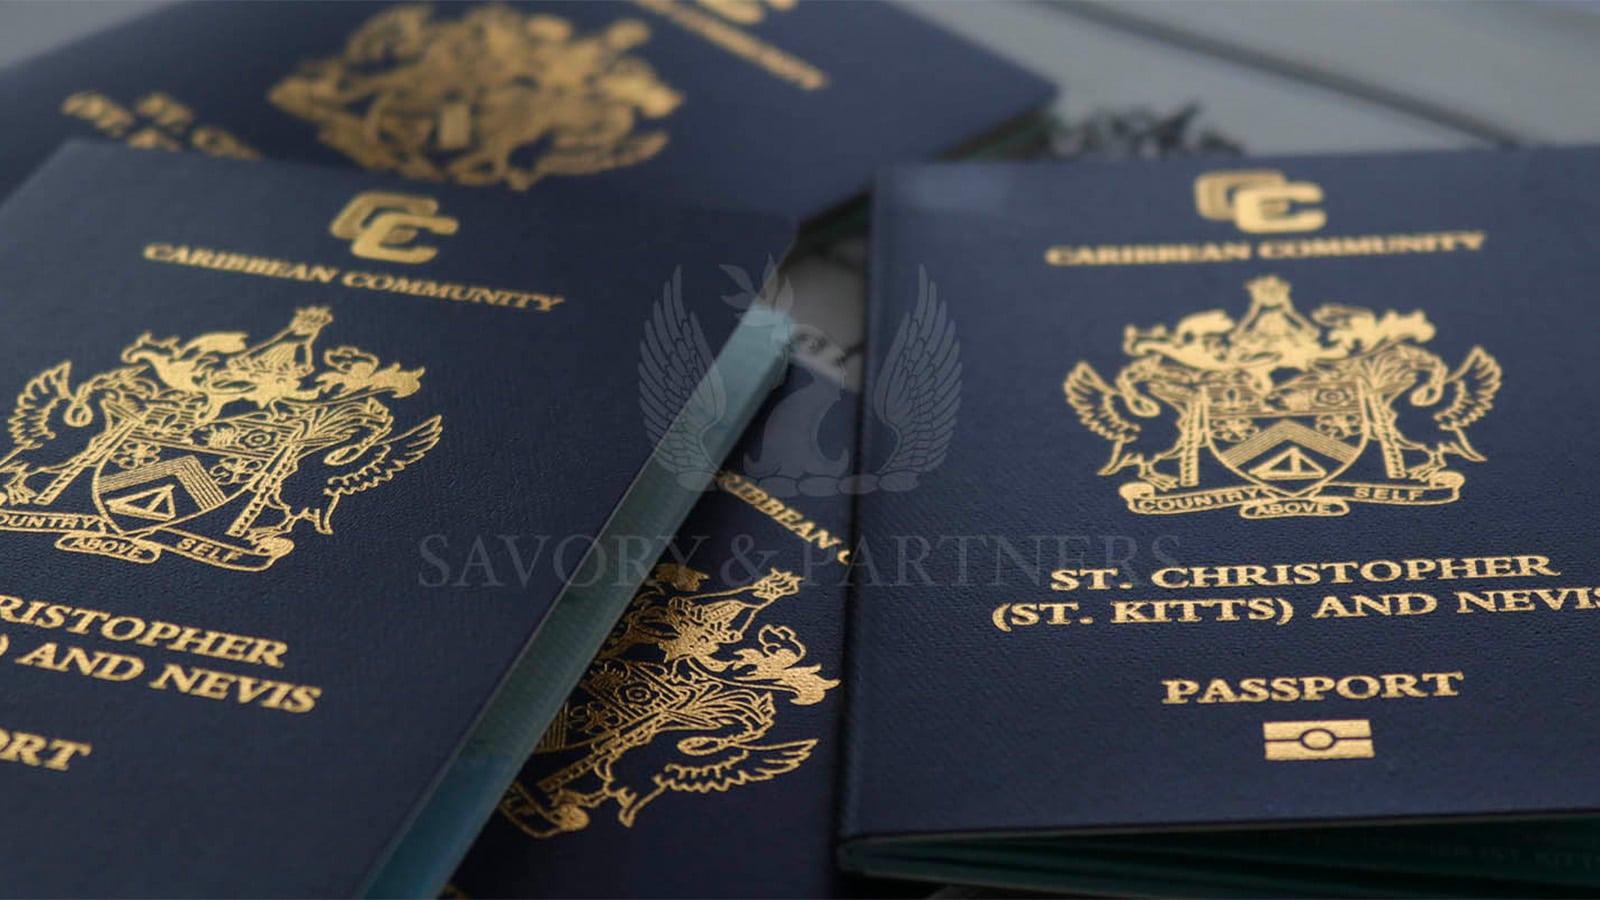 Validity of Caribbean Citizenship - Is it for life? - Savory & Partners